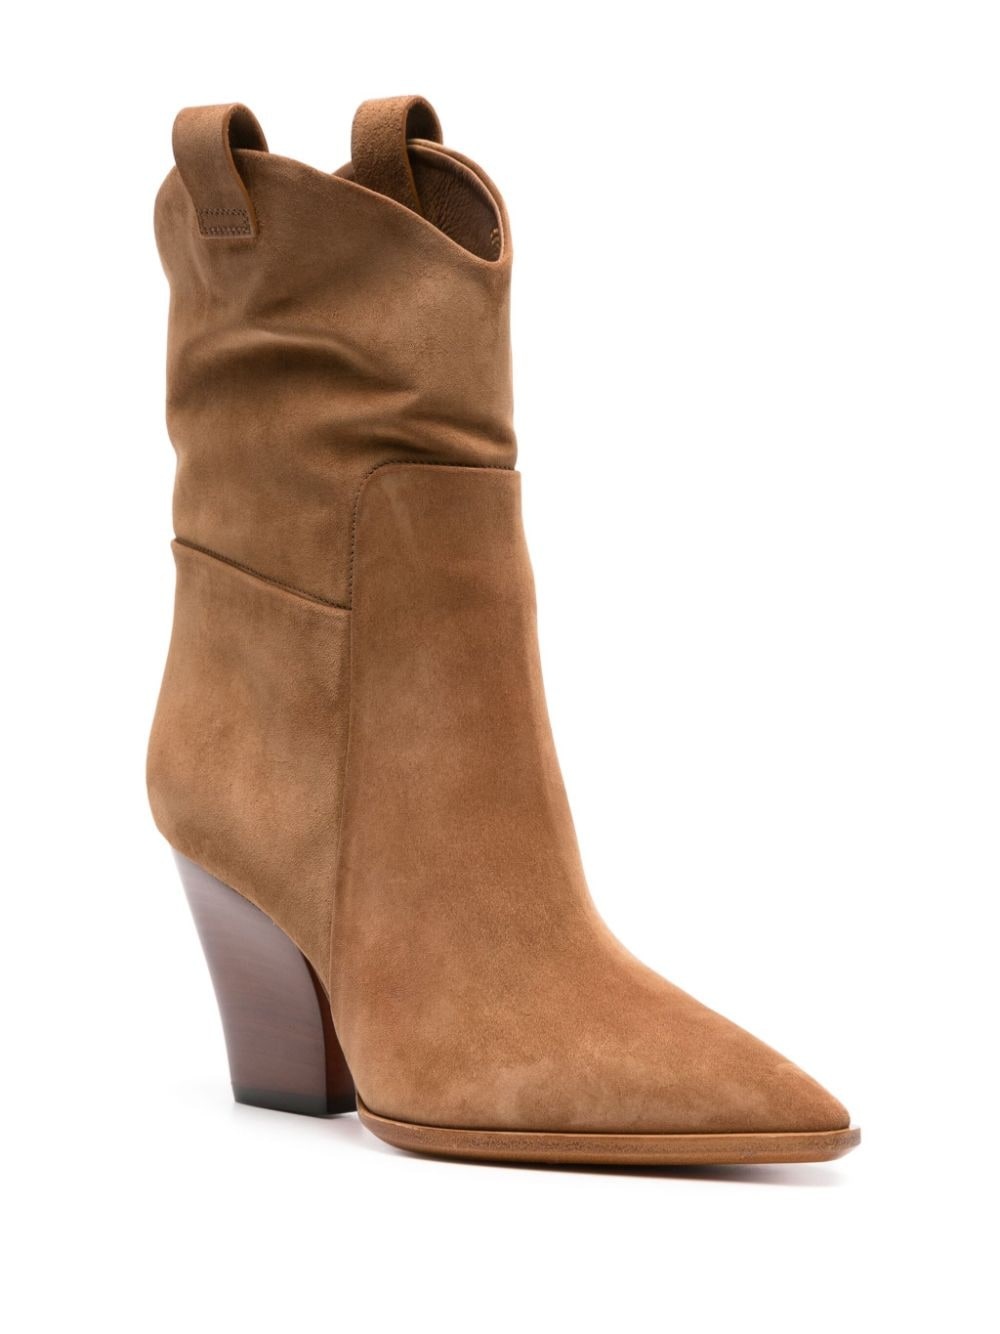 90mm suede ankle boots - 2